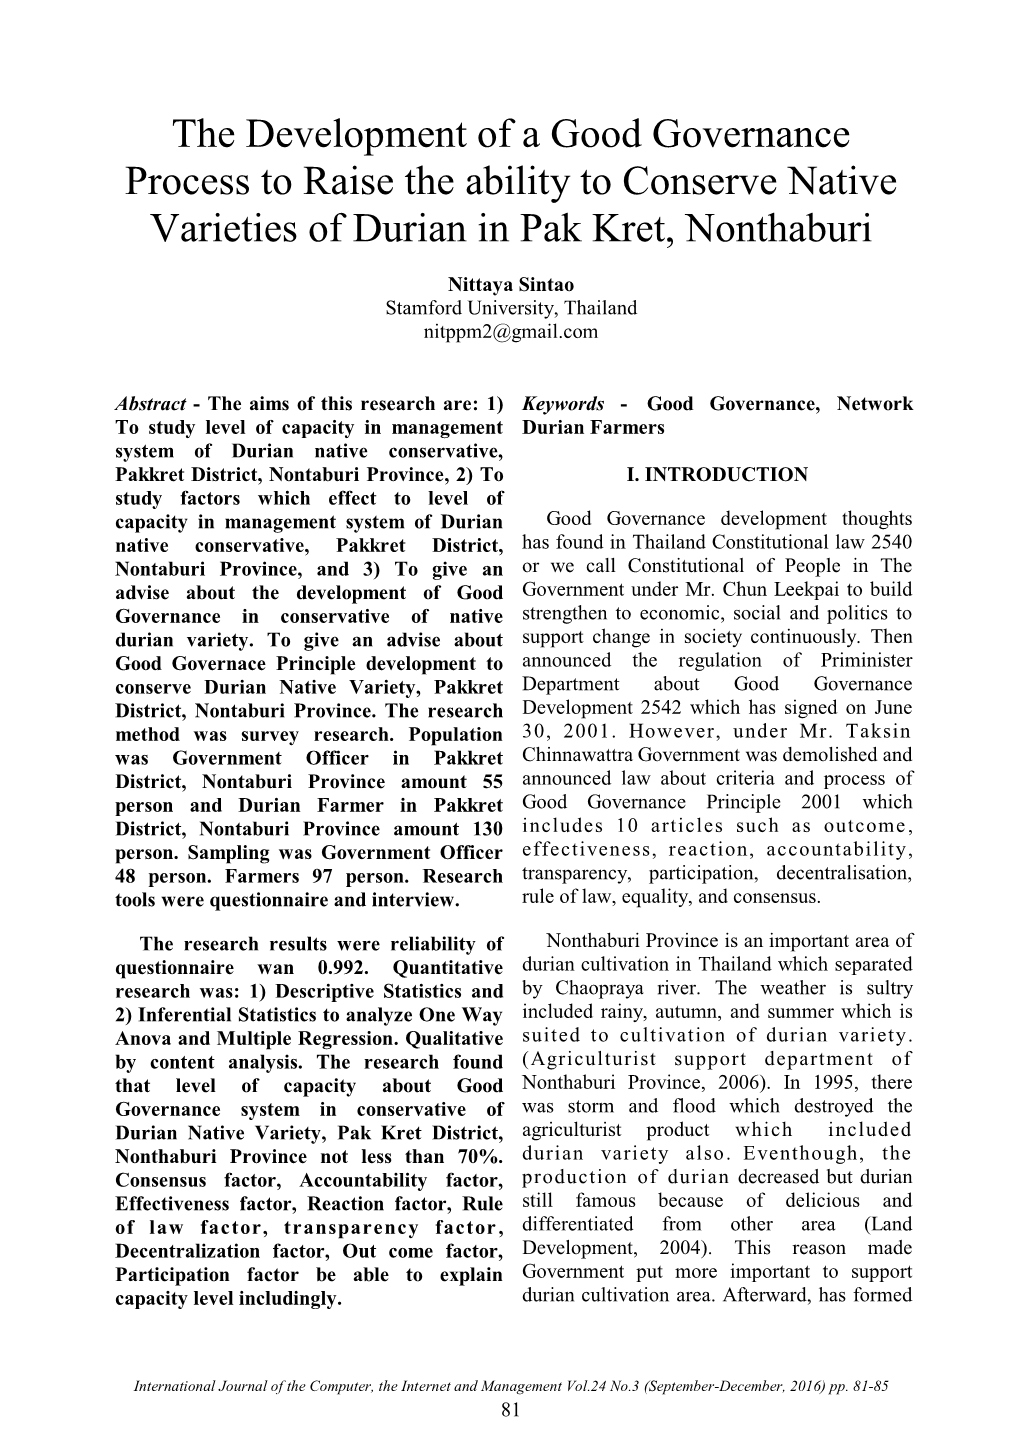 The Development of a Good Governance Process to Raise the Ability to Conserve Native Varieties of Durian in Pak Kret, Nonthaburi